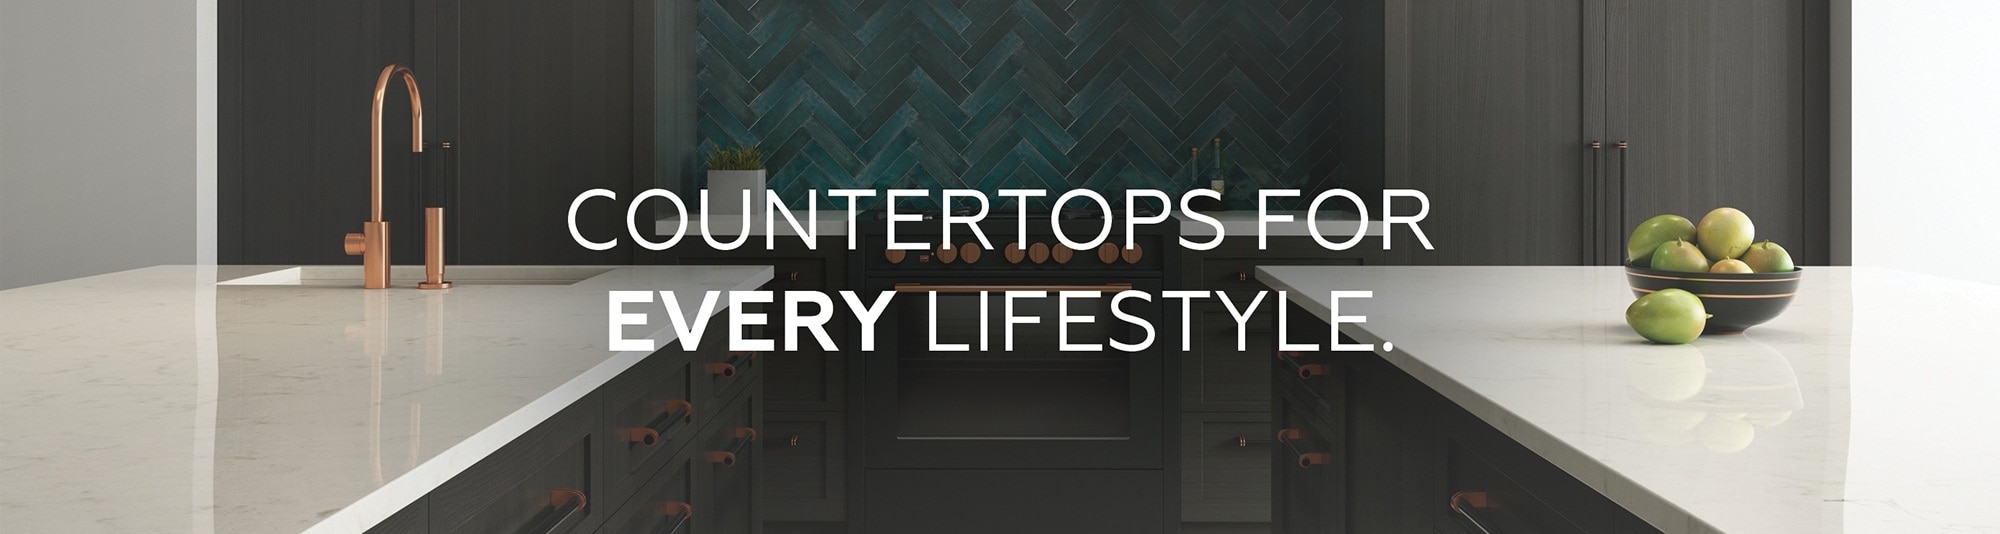 Countertops for Every Lifestyle